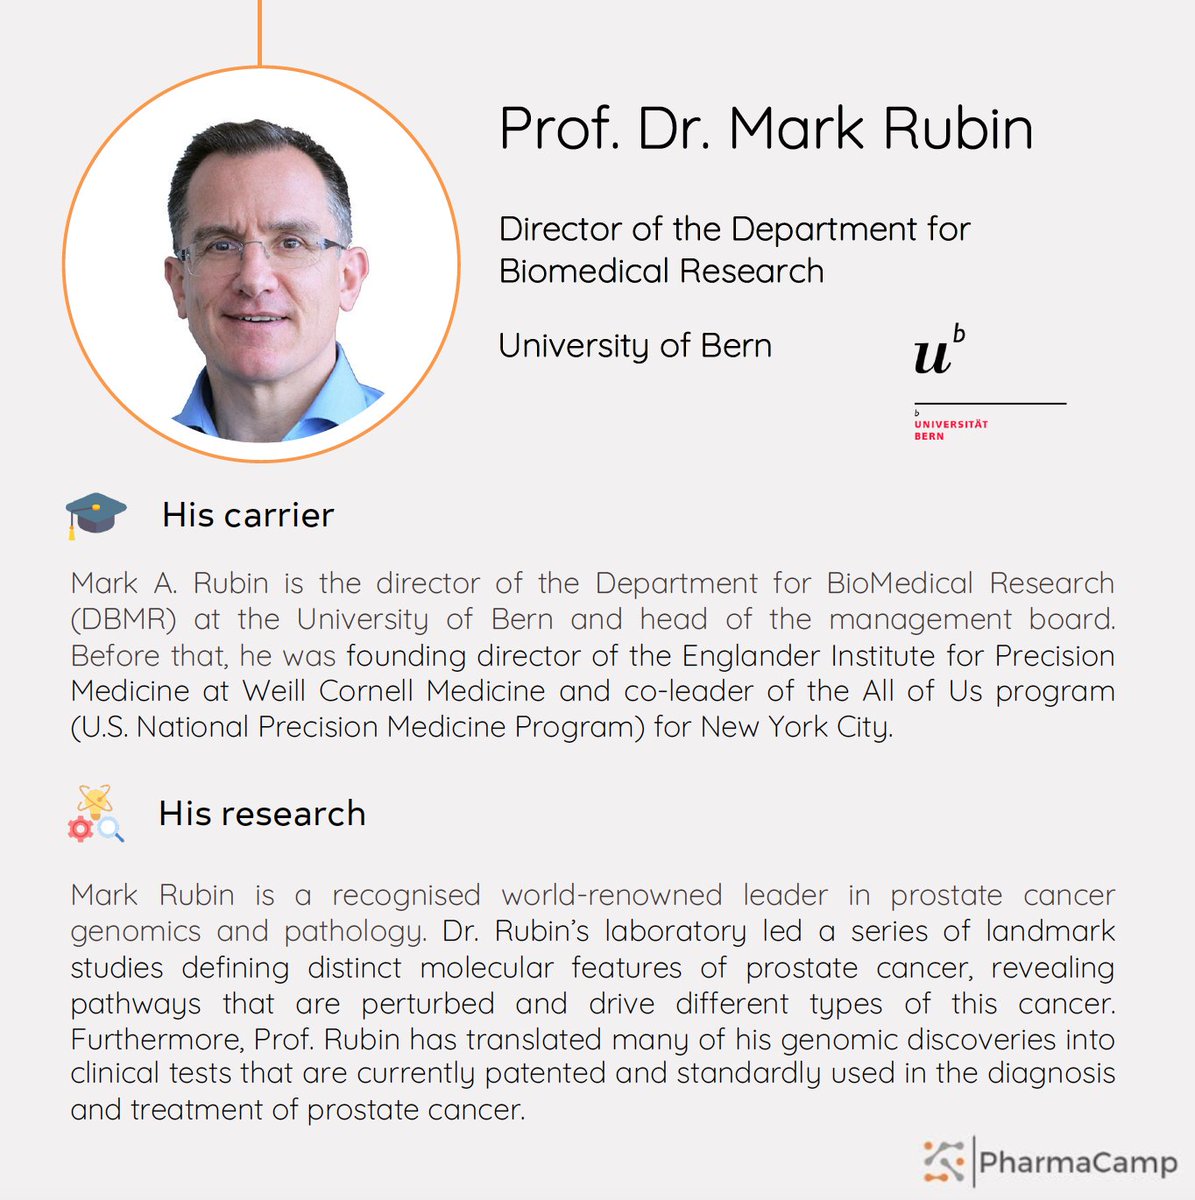 Pharmacamp 2023 will take place in Bern in September. Meet our speakers ! Third on is Prof. Dr. Mark Rubin, Director of the Department for Biomedical research at the University of Bern! We are looking forward to listen to his talk ! #pharmacamp #unibe #precisionmedicine